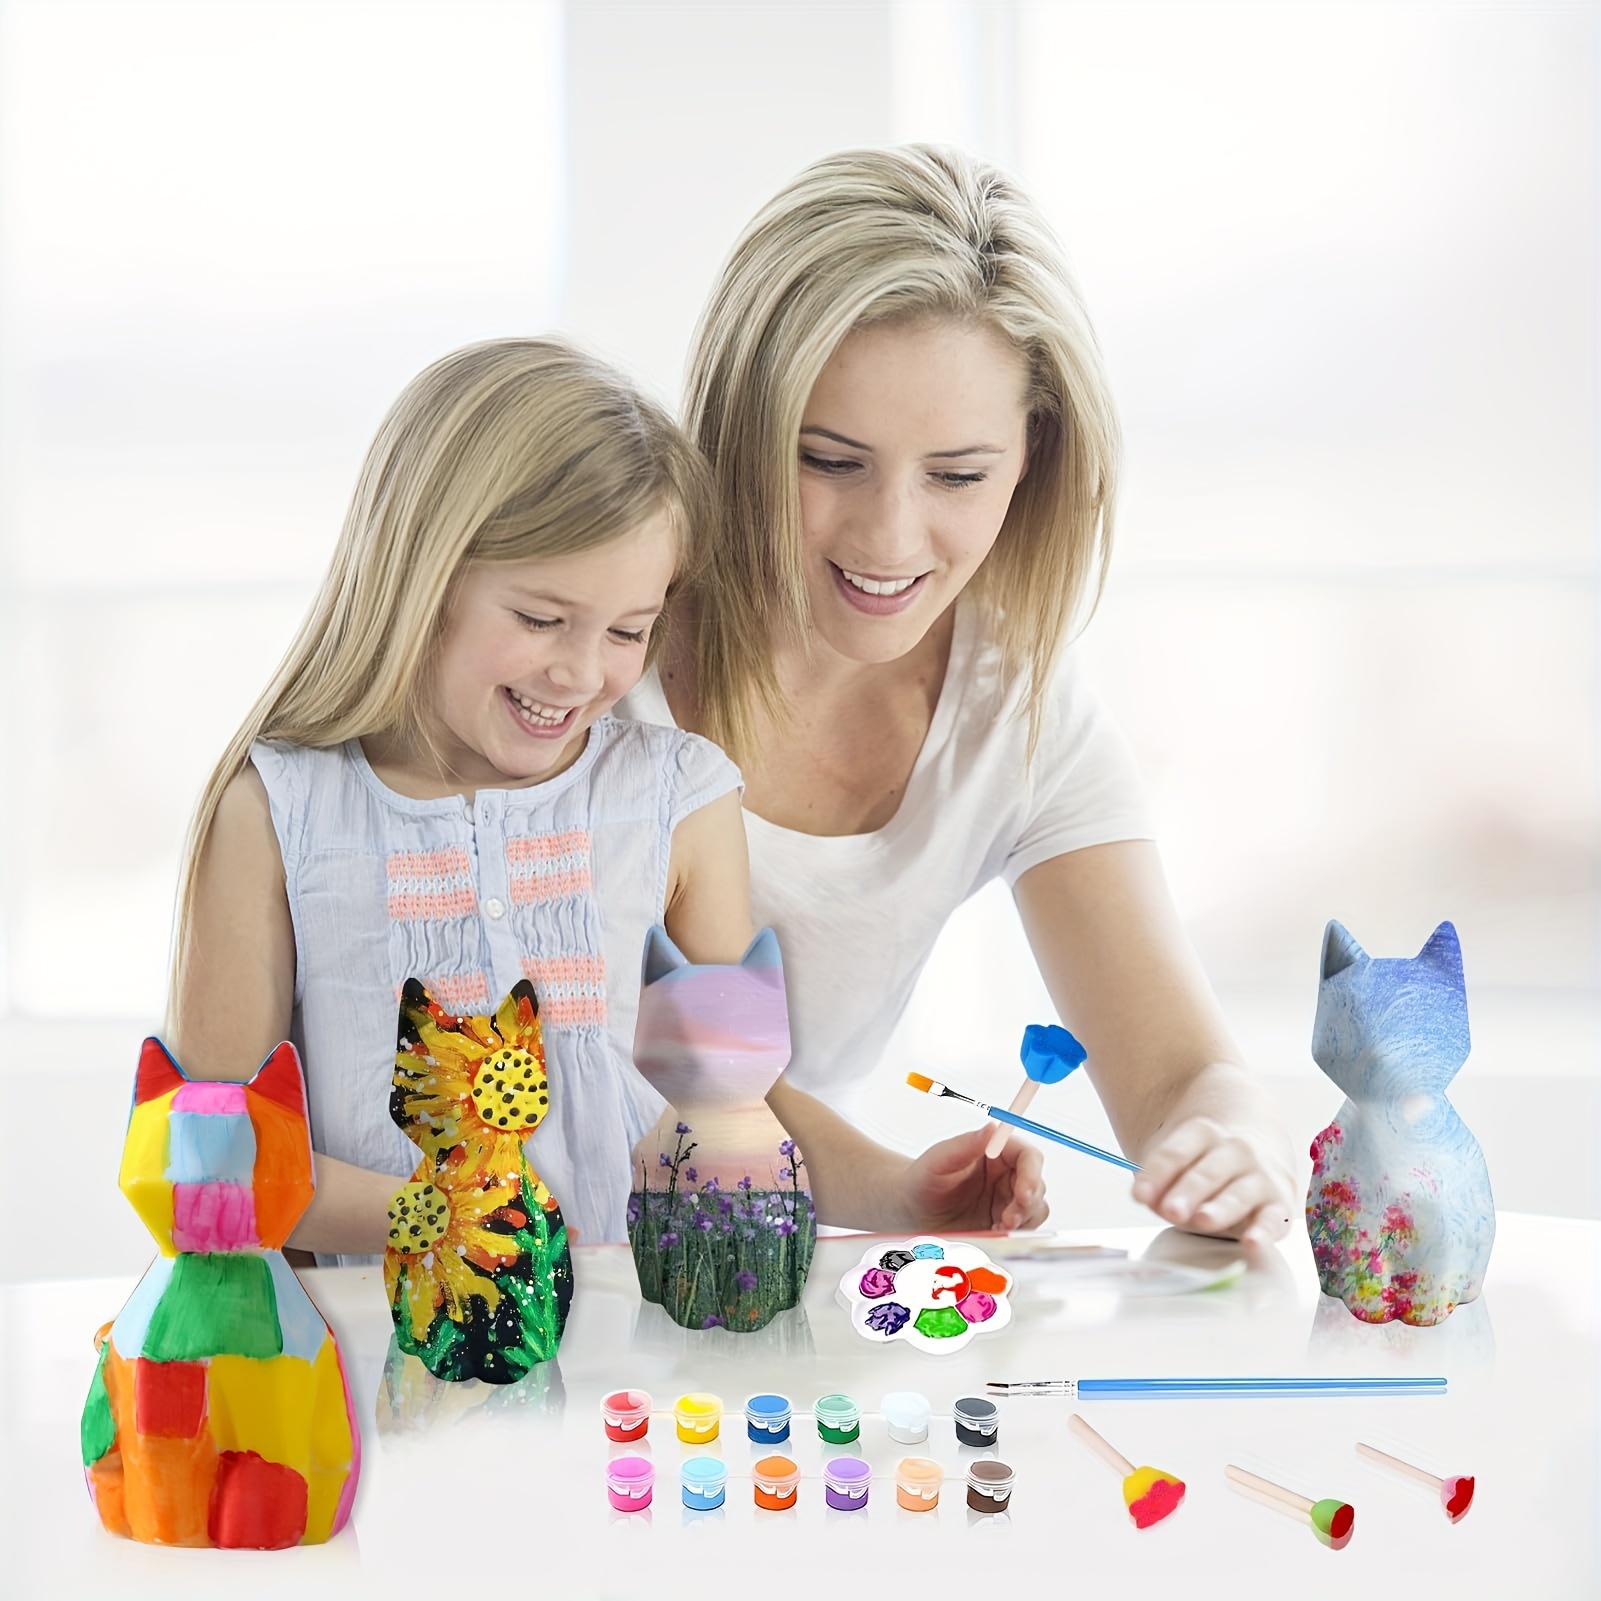 Paint Your Own Cat Lamp Art Kit, DIY Cat Art Craft Painting Kits, Animals Toys Night Light, Arts and Crafts for Kids Ages 8-12, Toys Girls Boy